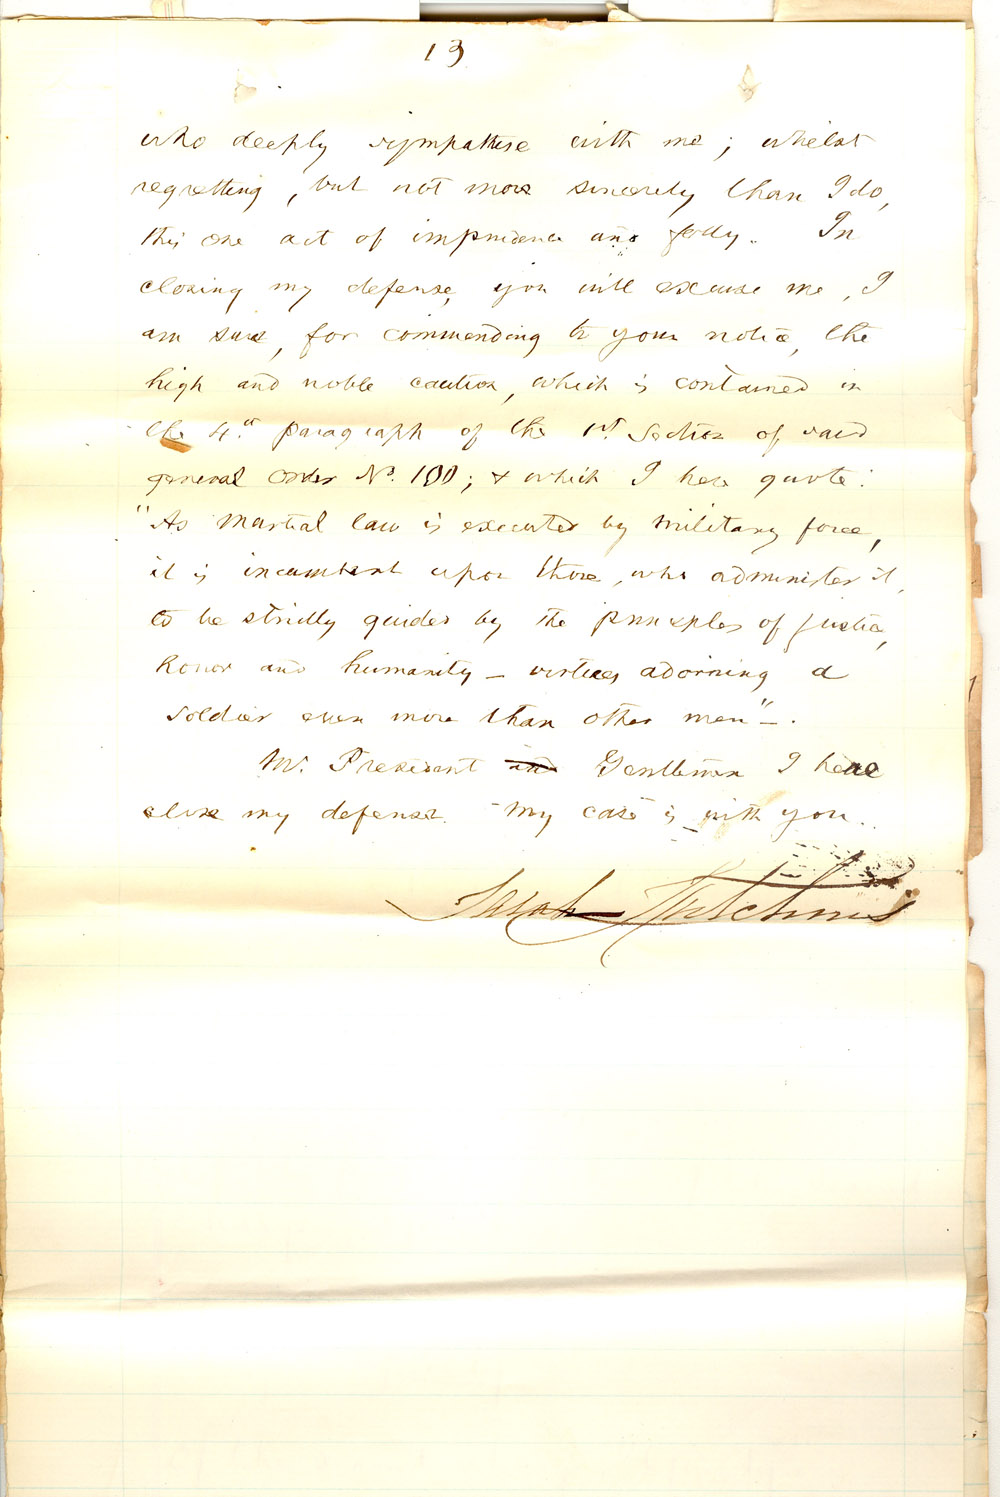 Sarah Hutchins's signed statement to the court